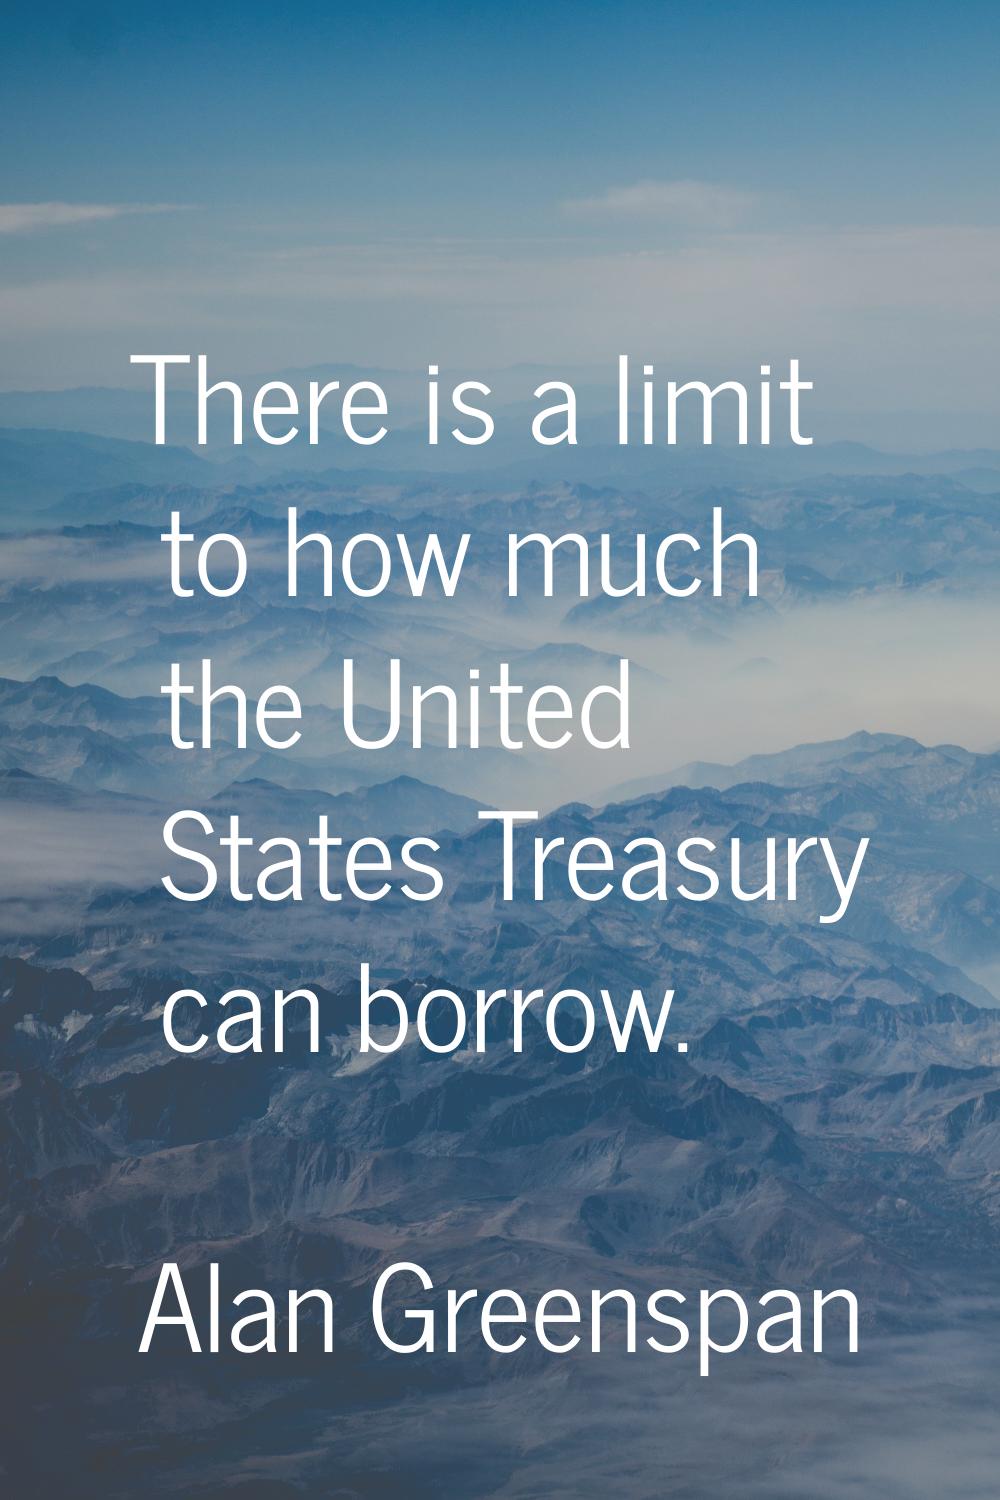 There is a limit to how much the United States Treasury can borrow.